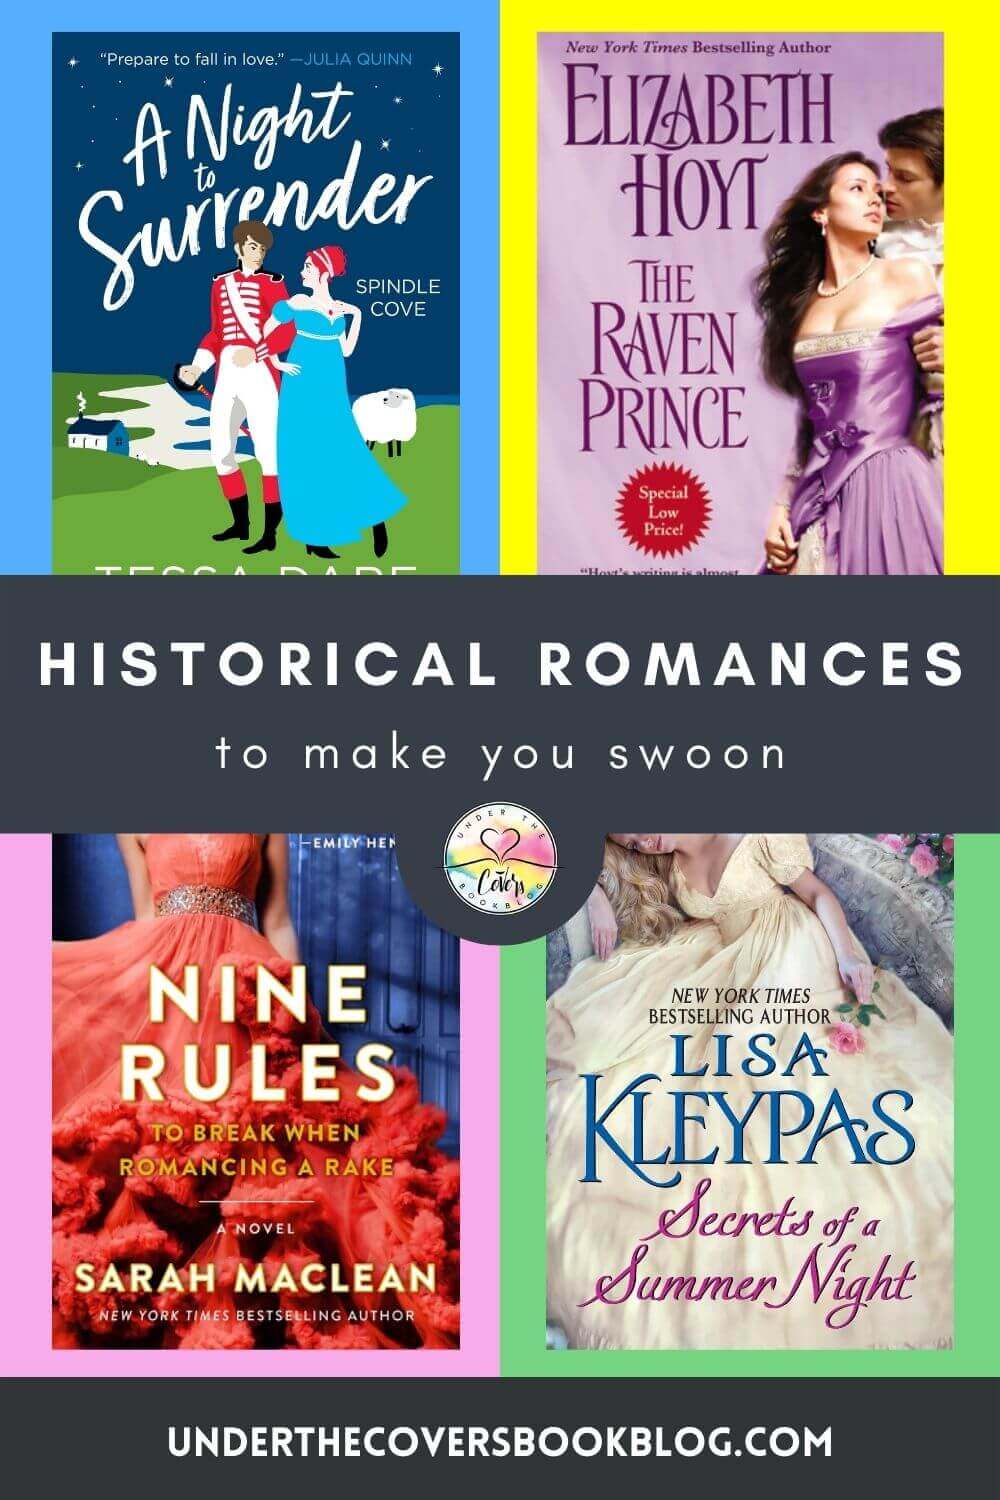 The Best Historical Romance Novels You Have to Read